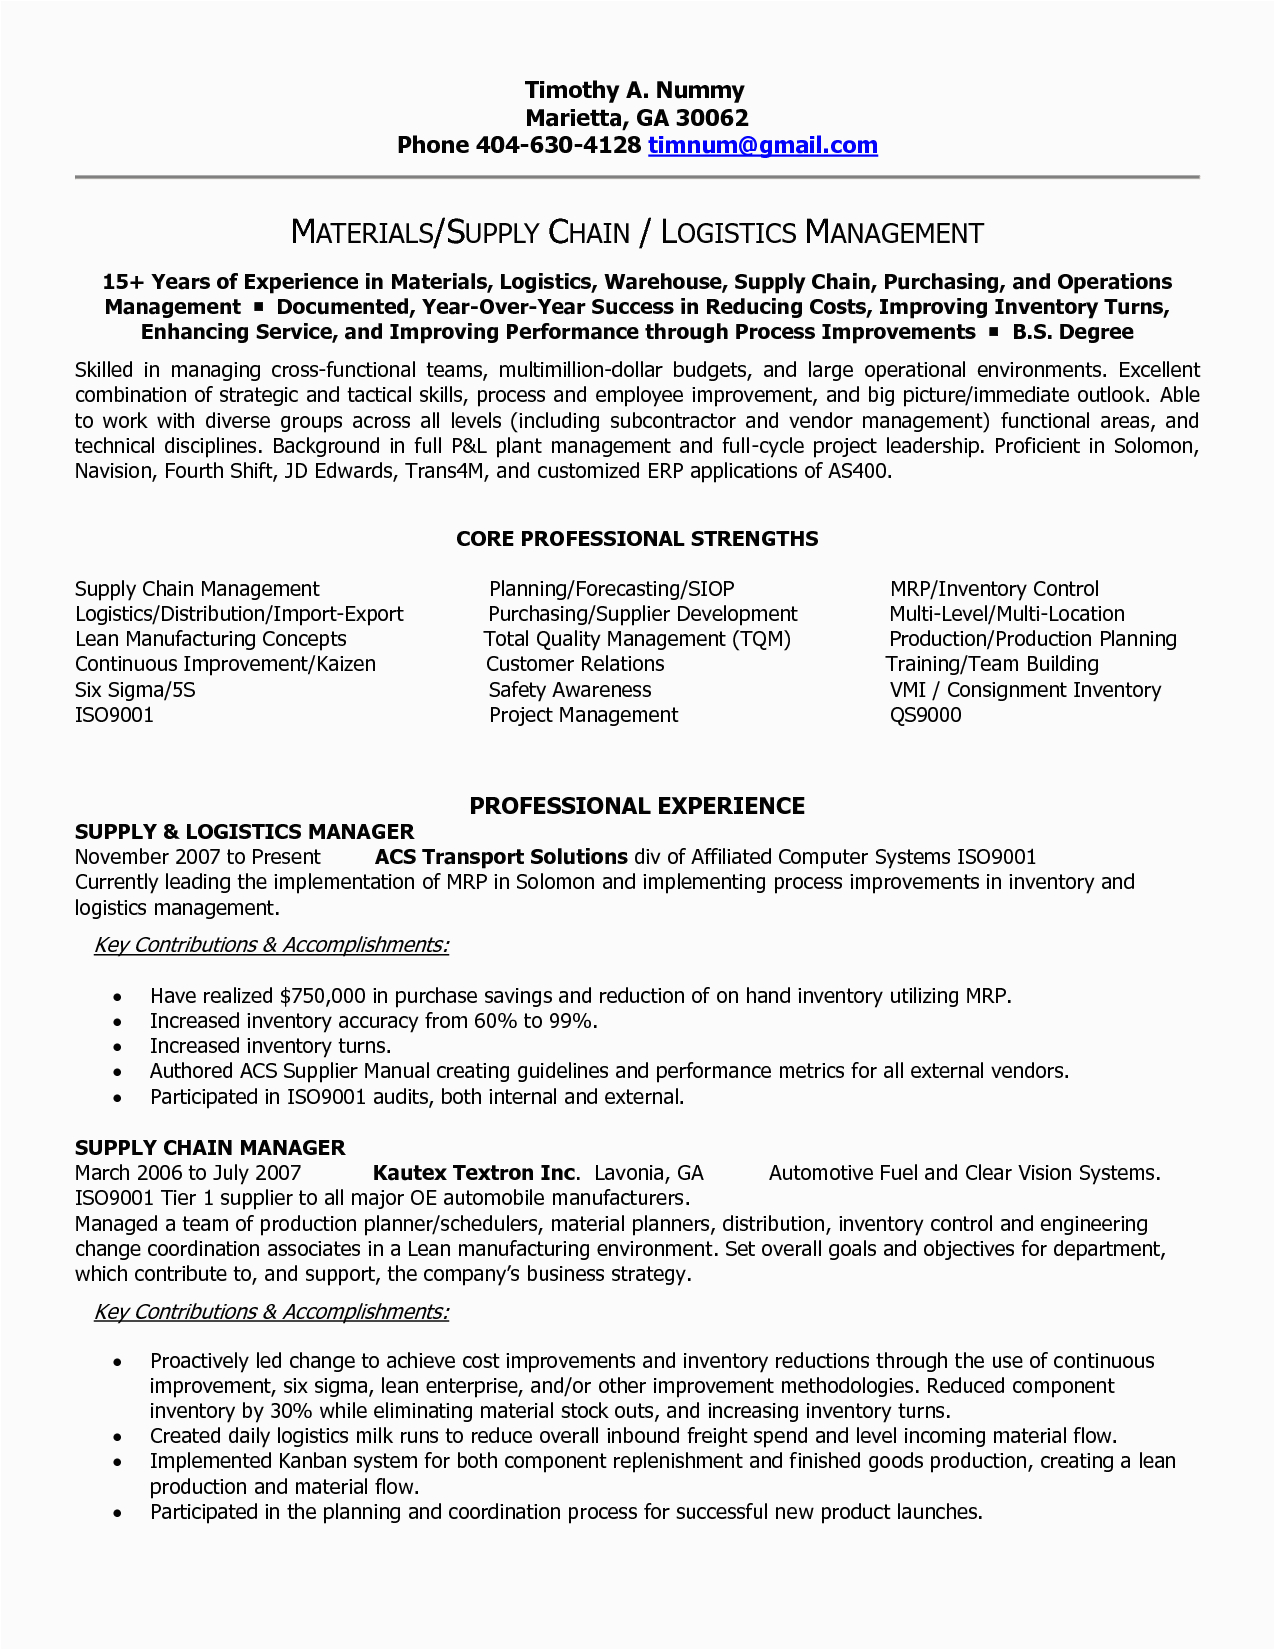 Sample Resume for Supply Chain Executive Supply Chain Manager In atlanta Ga Resume Timothy Nummy